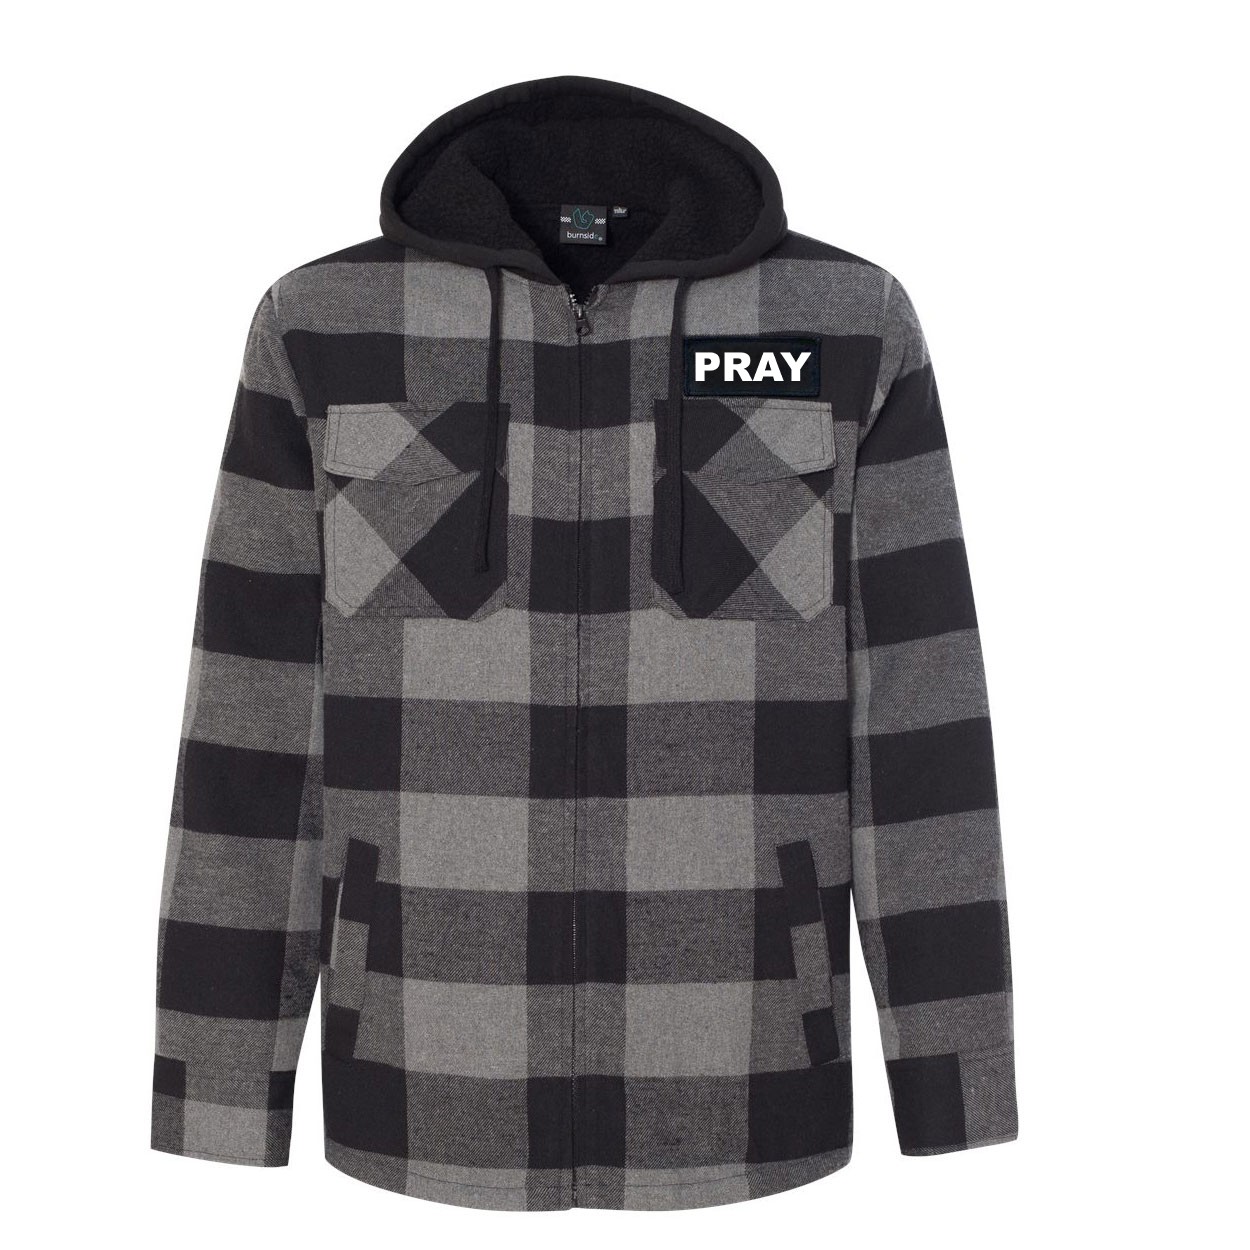 Pray Brand Logo Classic Unisex Full Zip Woven Patch Hooded Flannel Jacket Black/Gray